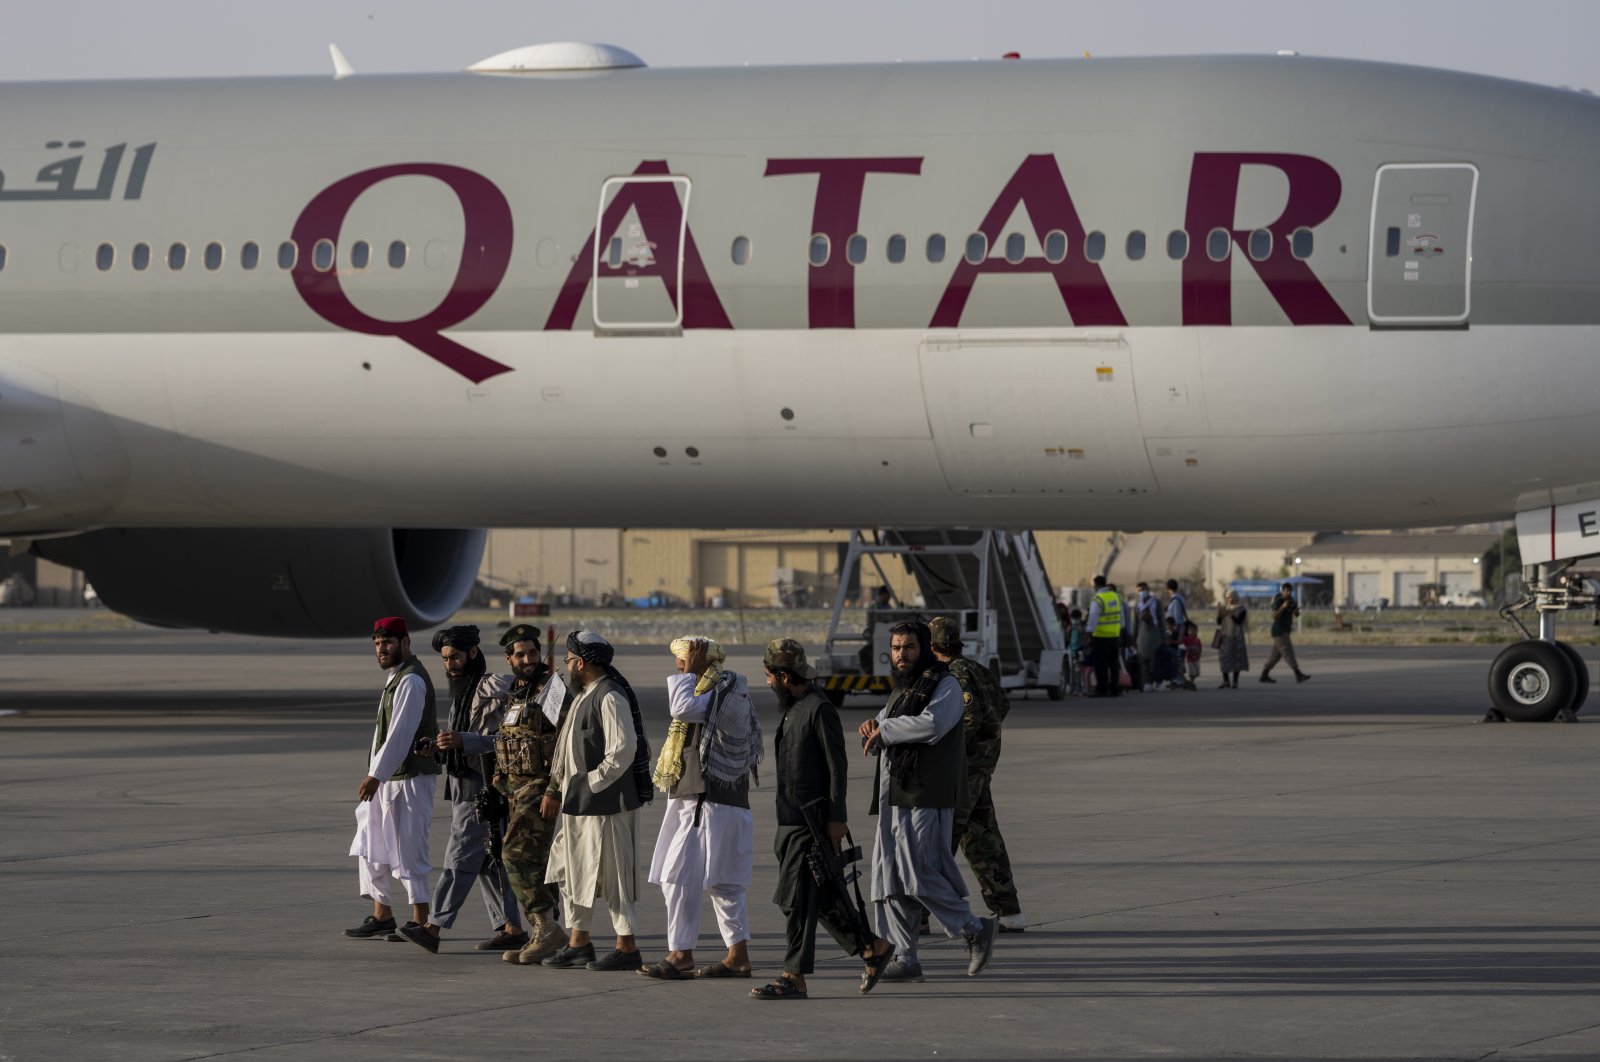 Taliban fighters walk past a Qatar Airways aircraft at the airport in Kabul, Afghanistan, Sept. 9, 2021. (AP Photo)